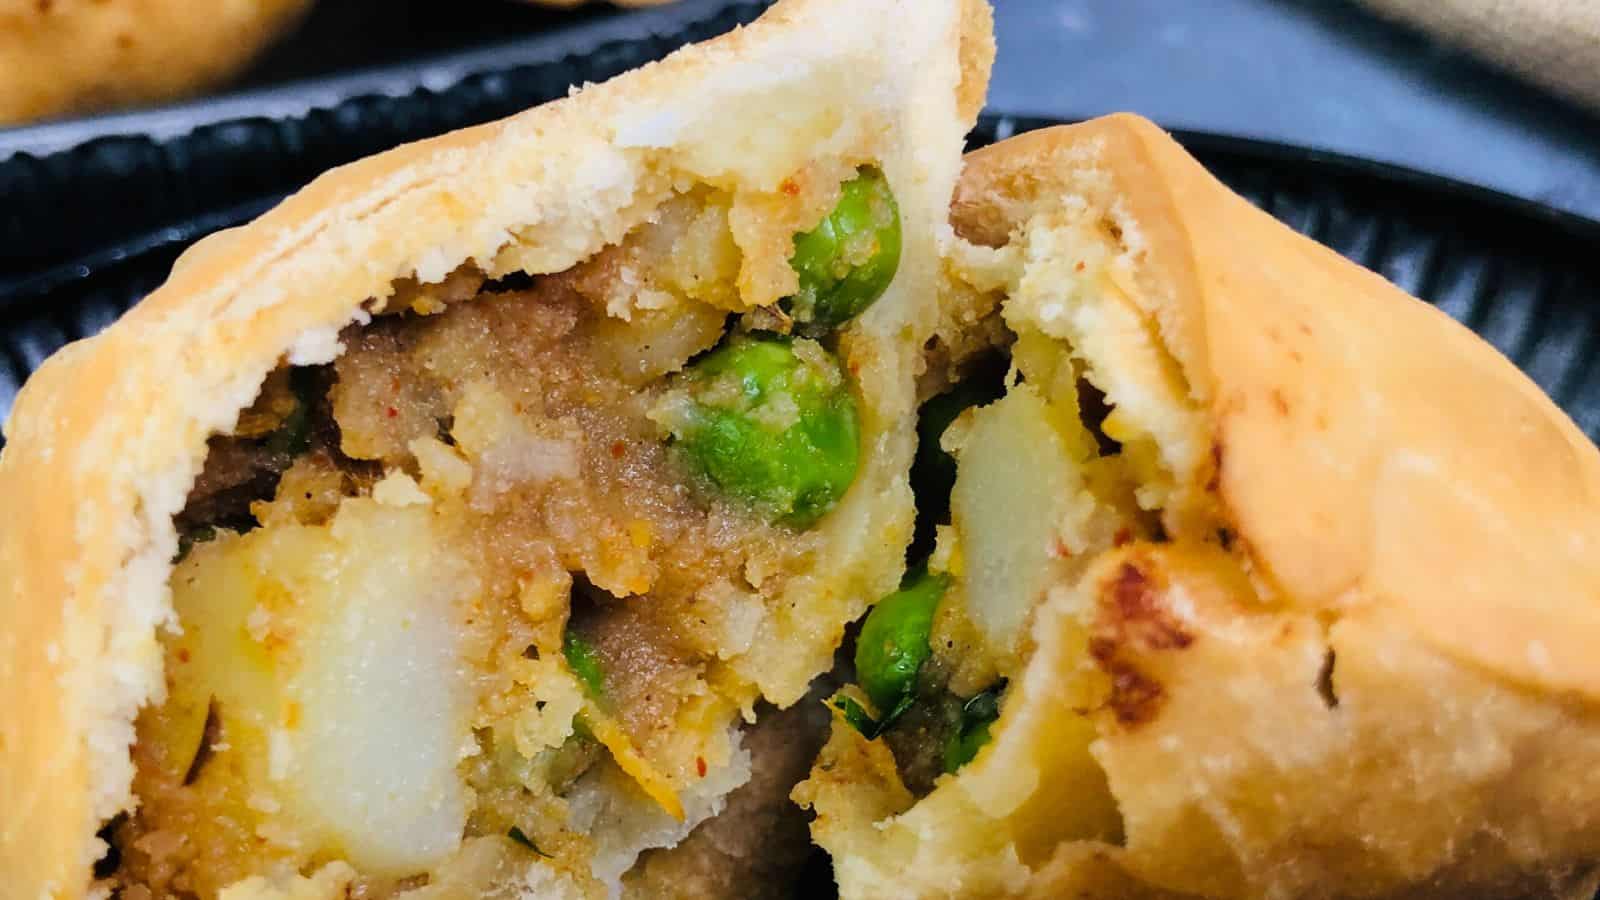 Close-up of a cut samosa revealing its filling of potatoes, peas, and spices. The golden-brown crust appears crispy, and the stuffing is well-cooked. The background includes more samosas and a black plate.